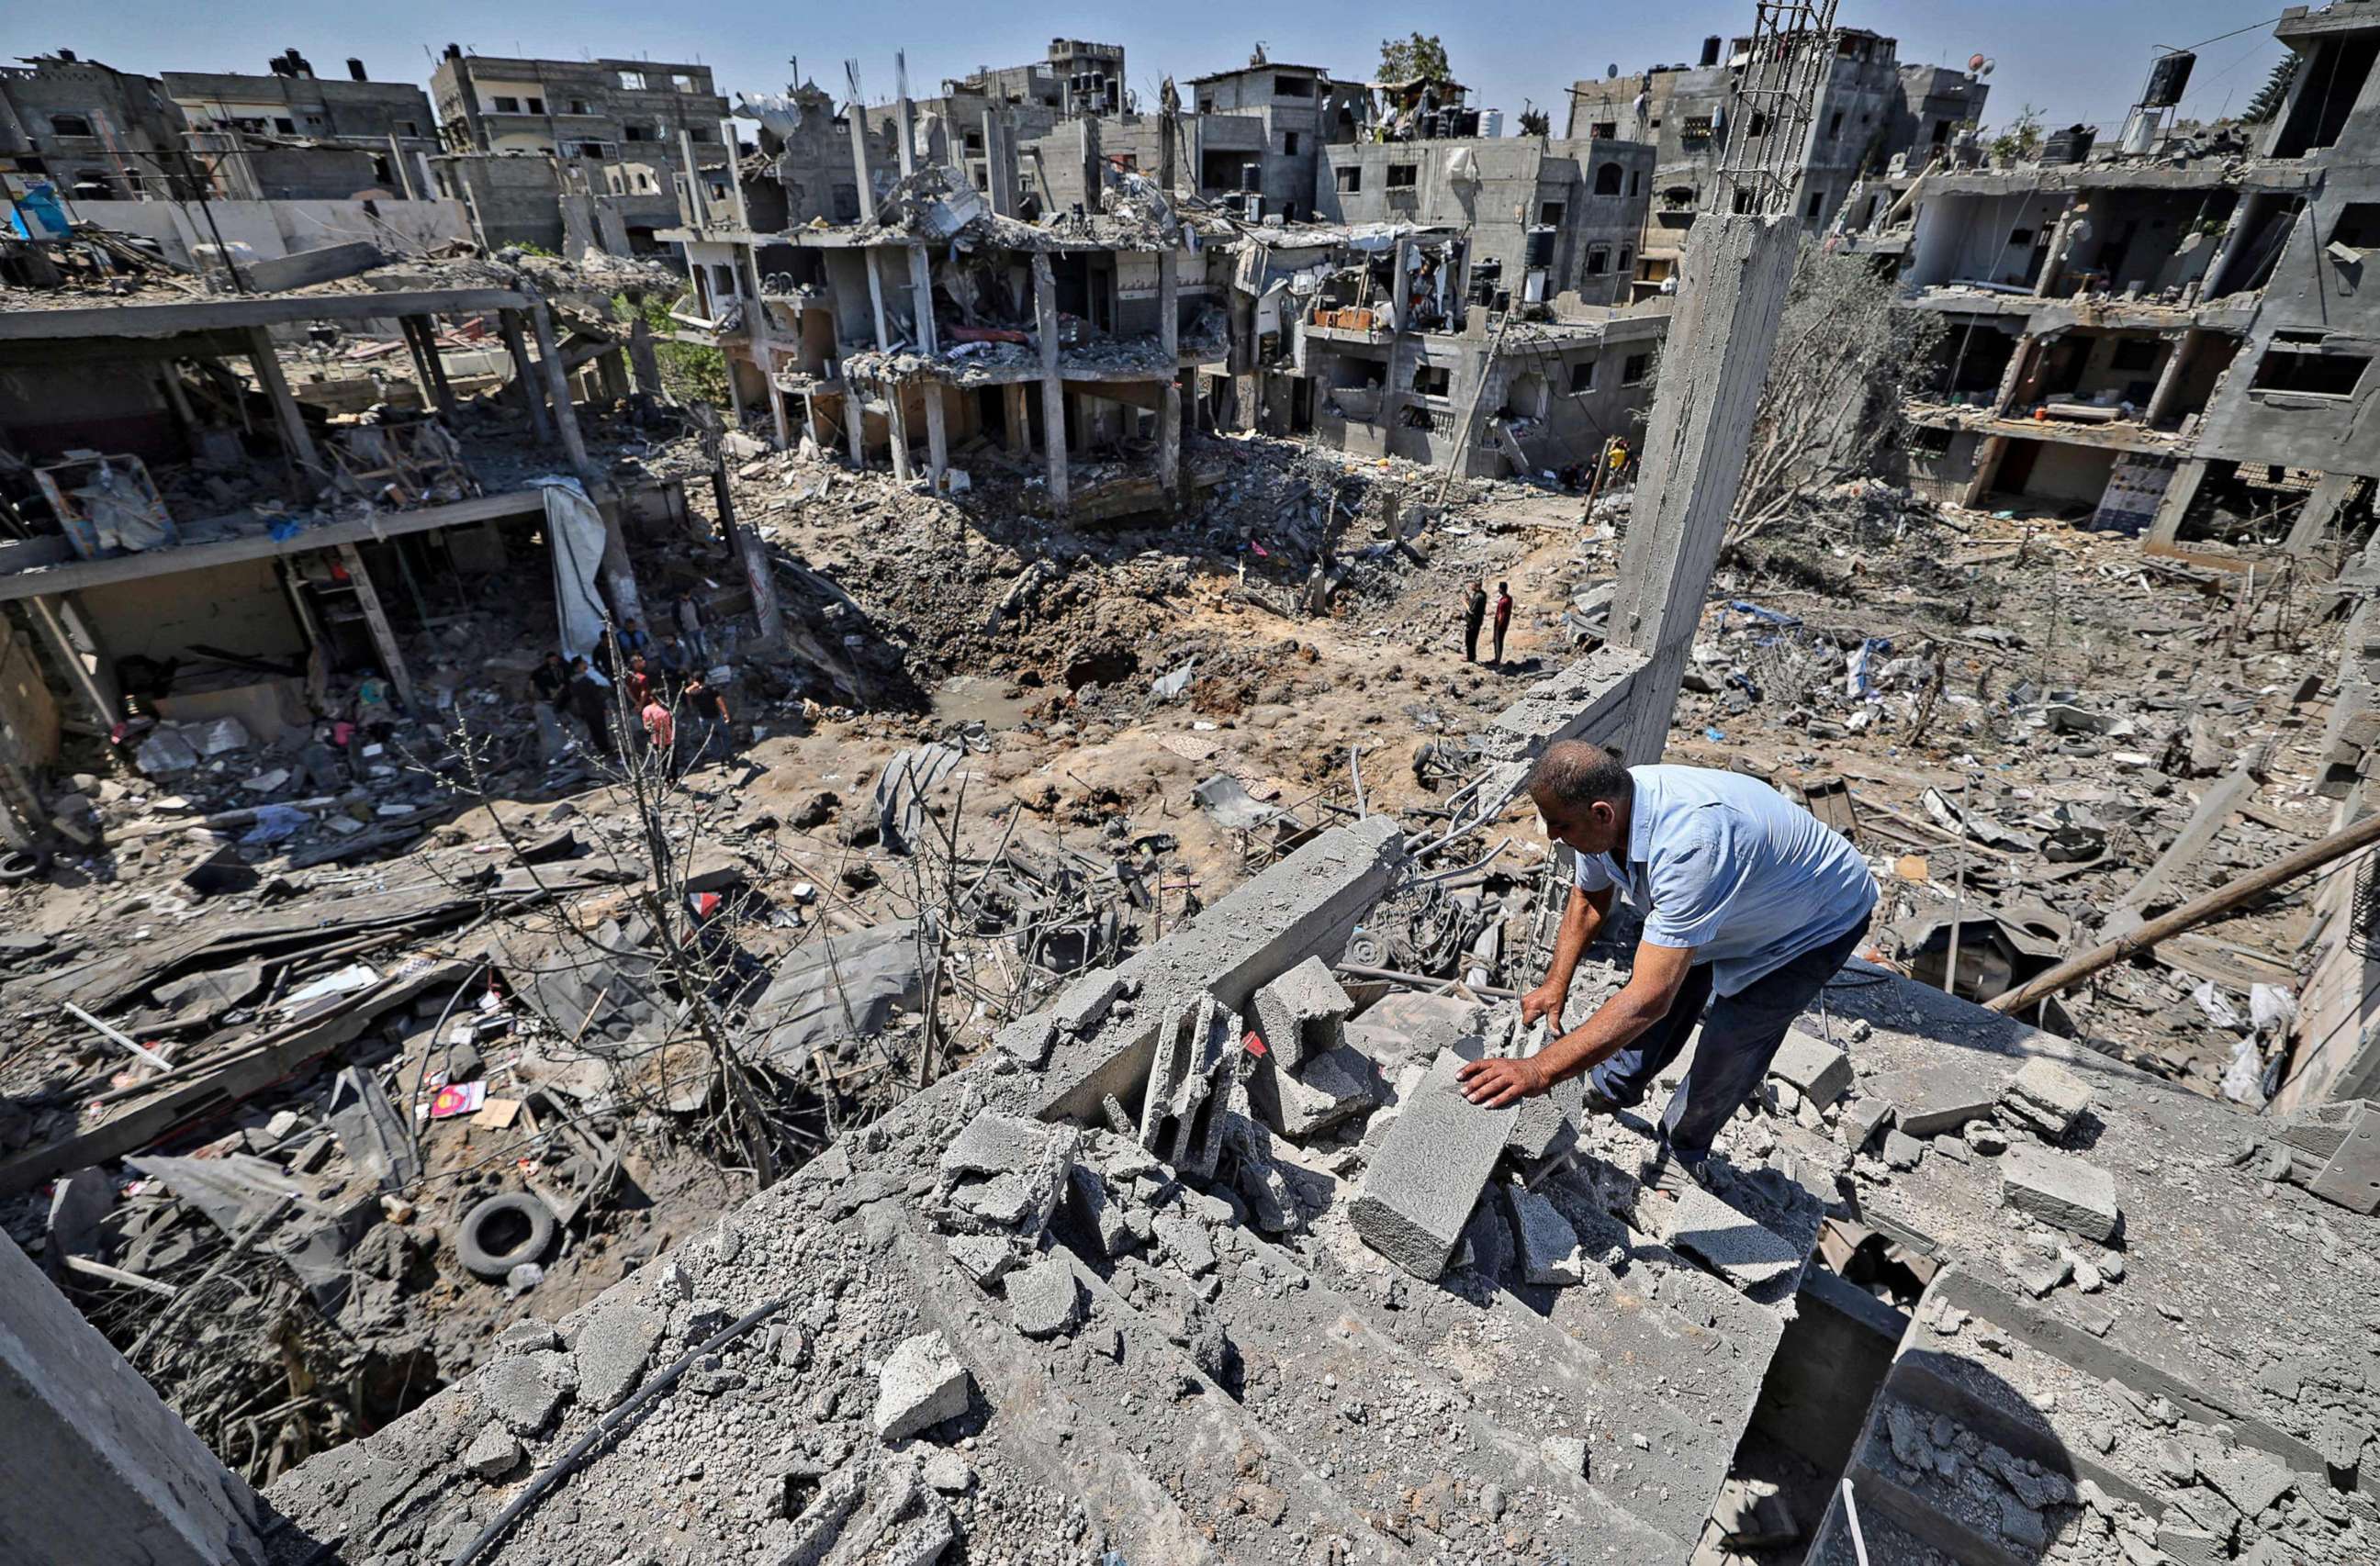 PHOTO: Palestinians assess the damage caused by Israeli air strikes, in Beit Hanun in the northern Gaza Strip, May 14, 2021.